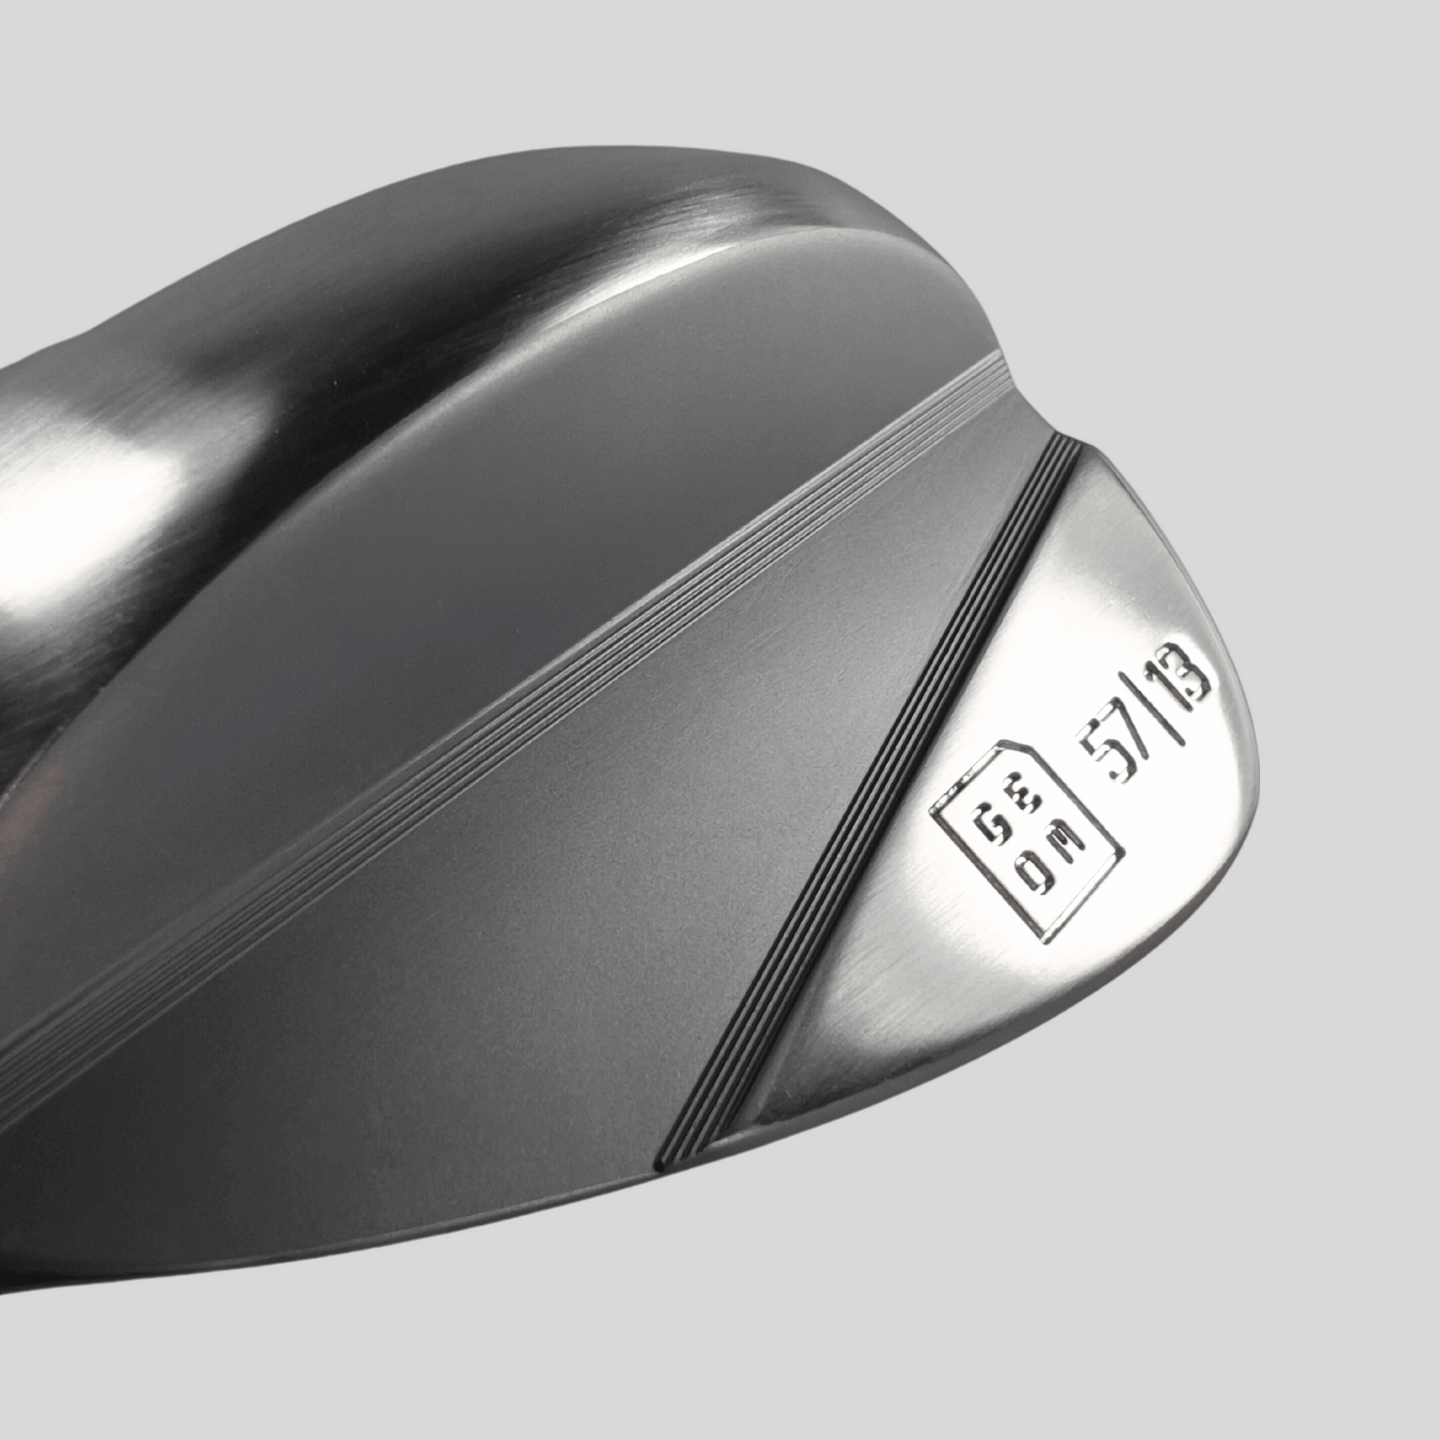 Design Your Own Tour Inspired Wedges